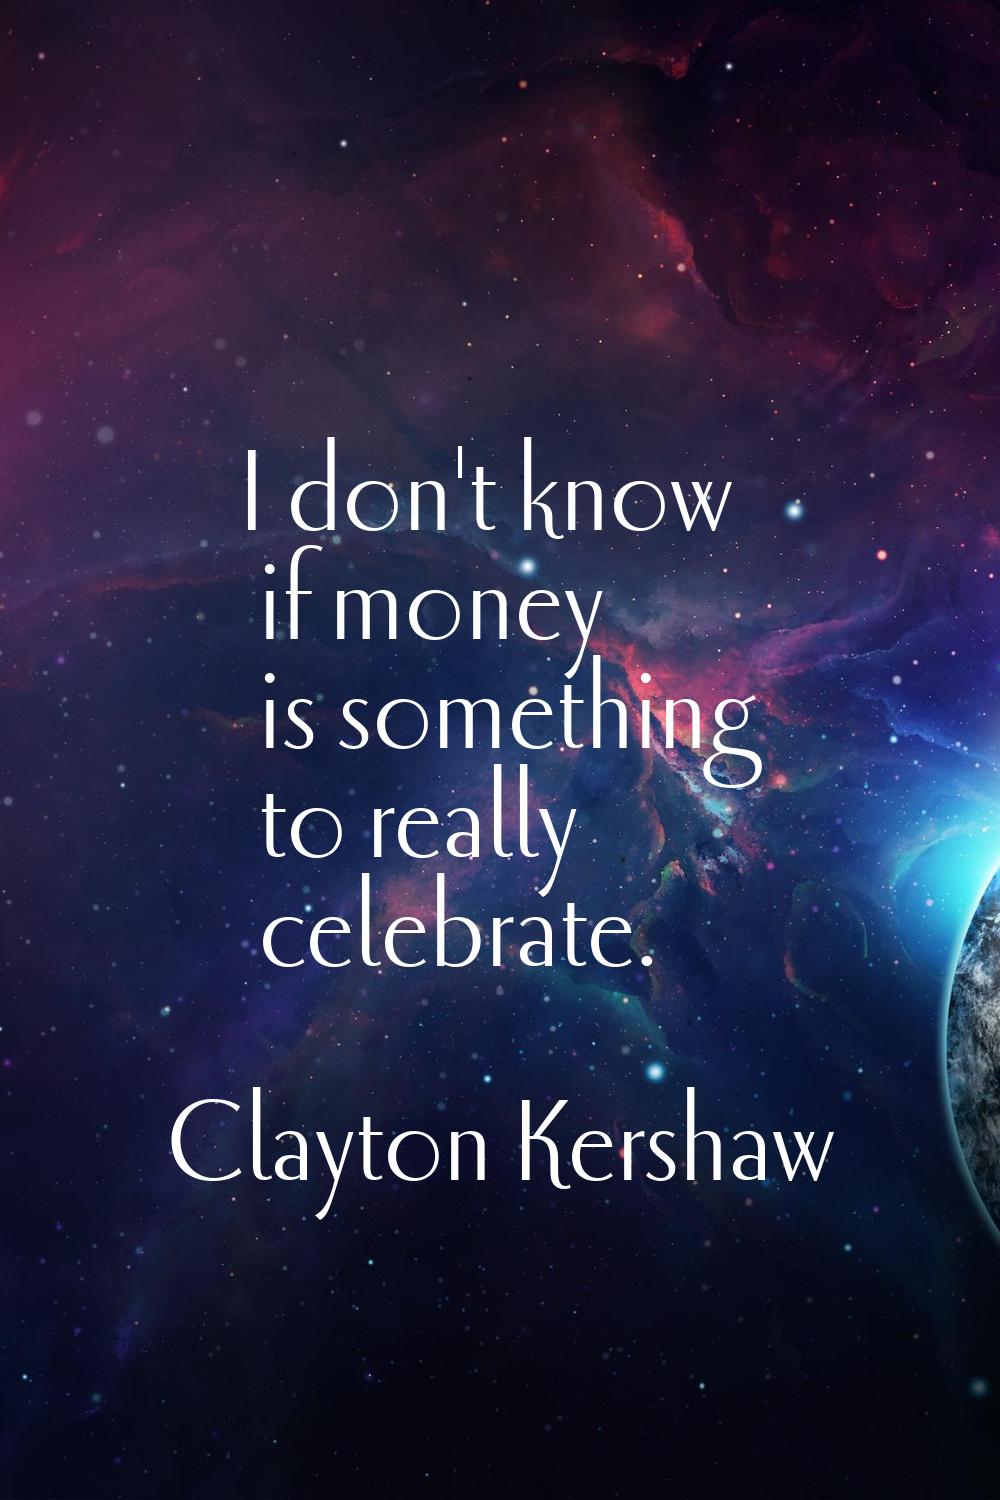 I don't know if money is something to really celebrate.